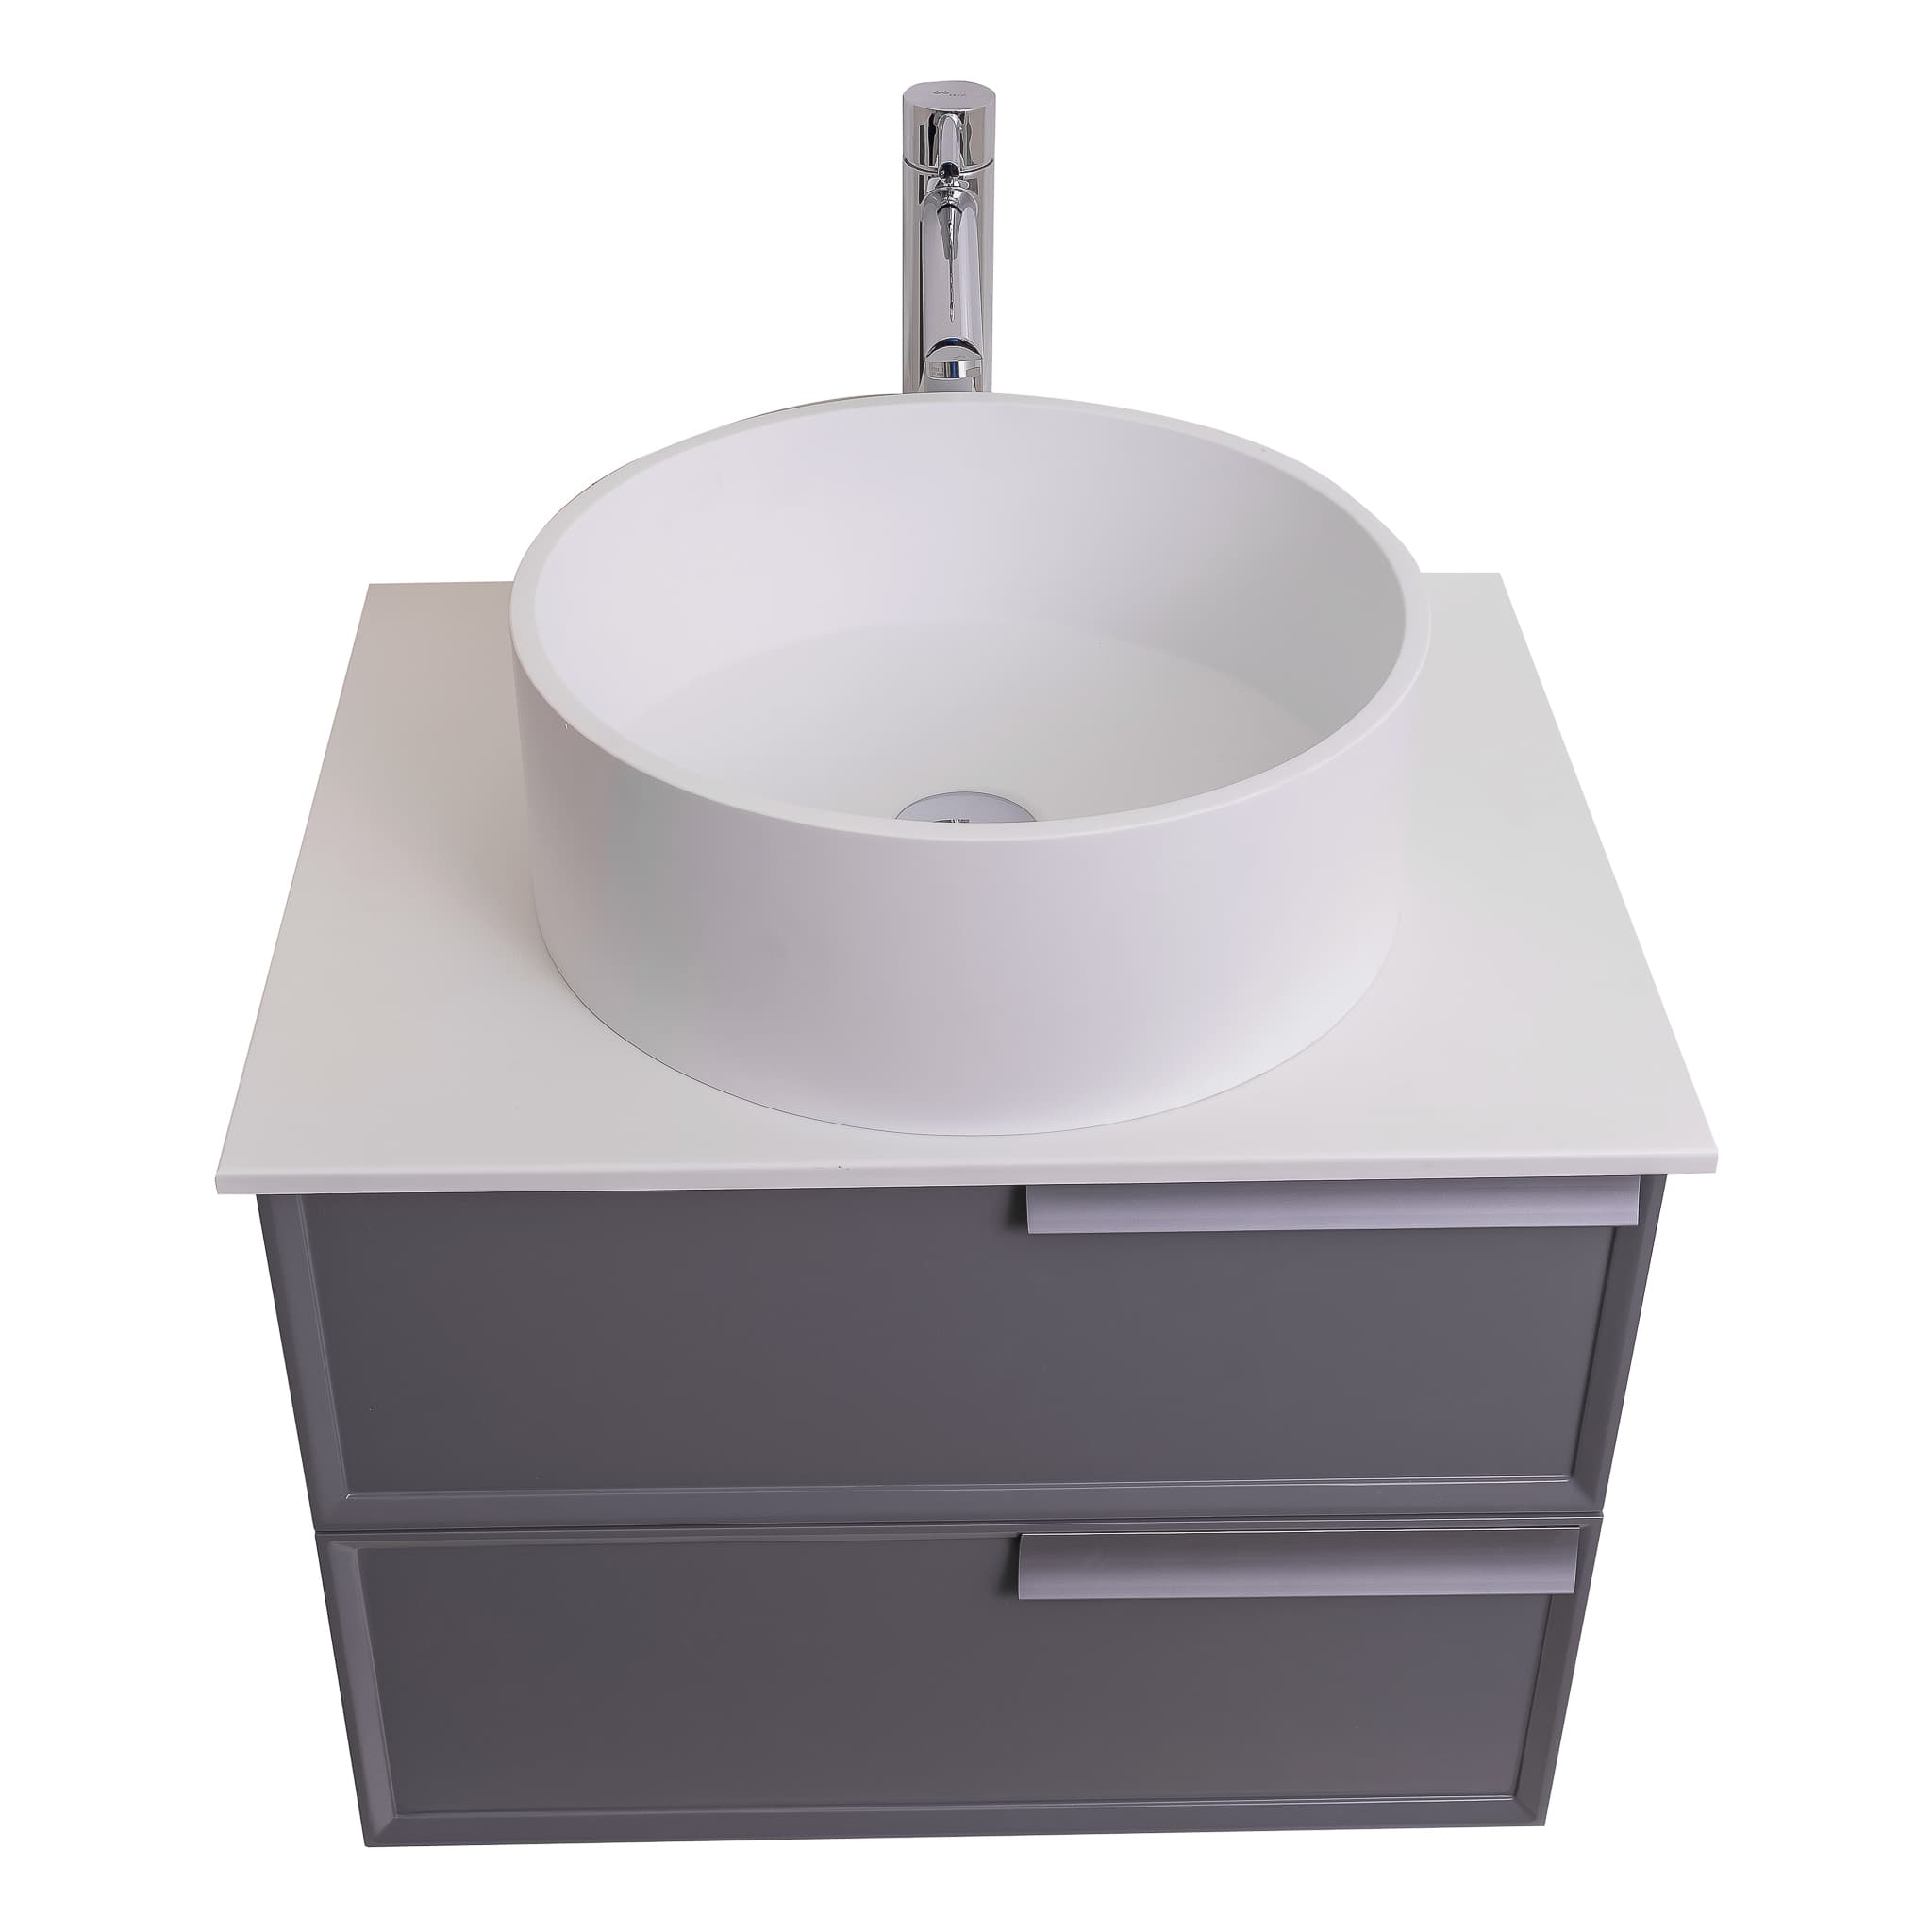 Garda 23.5 Matte Grey Cabinet, Solid Surface Flat White Counter and Round Solid Surface White Basin 1386, Wall Mounted Modern Vanity Set